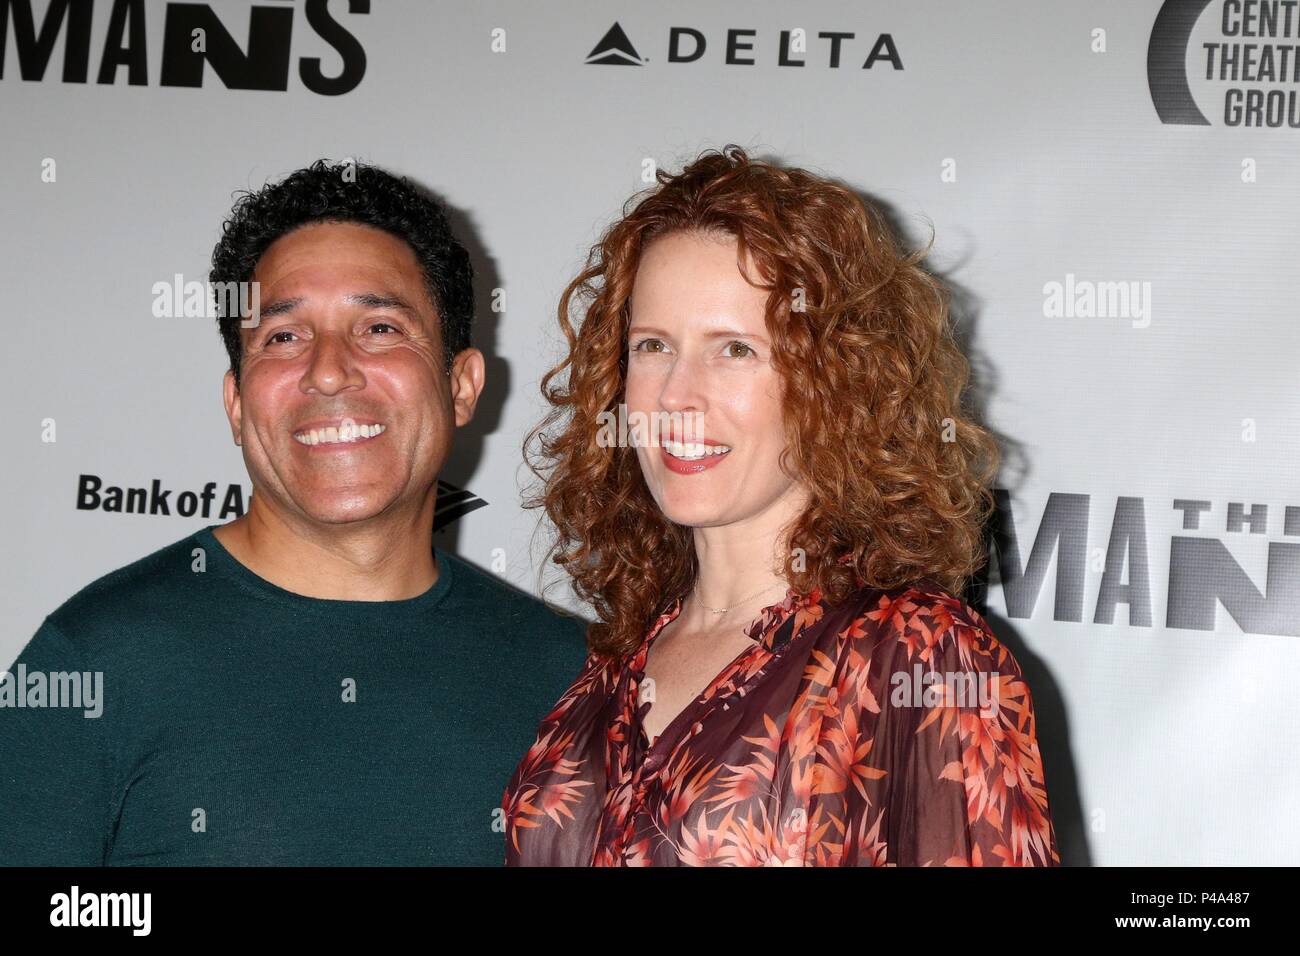 Los Angeles, CA, USA. 20th June, 2018. Oscar Nunez, Ursula Whittaker at arrivals for THE HUMANS Opening Night, Center Theatre Group - Ahmanson Theatre, Los Angeles, CA June 20, 2018. Credit: Priscilla Grant/Everett Collection/Alamy Live News Stock Photo